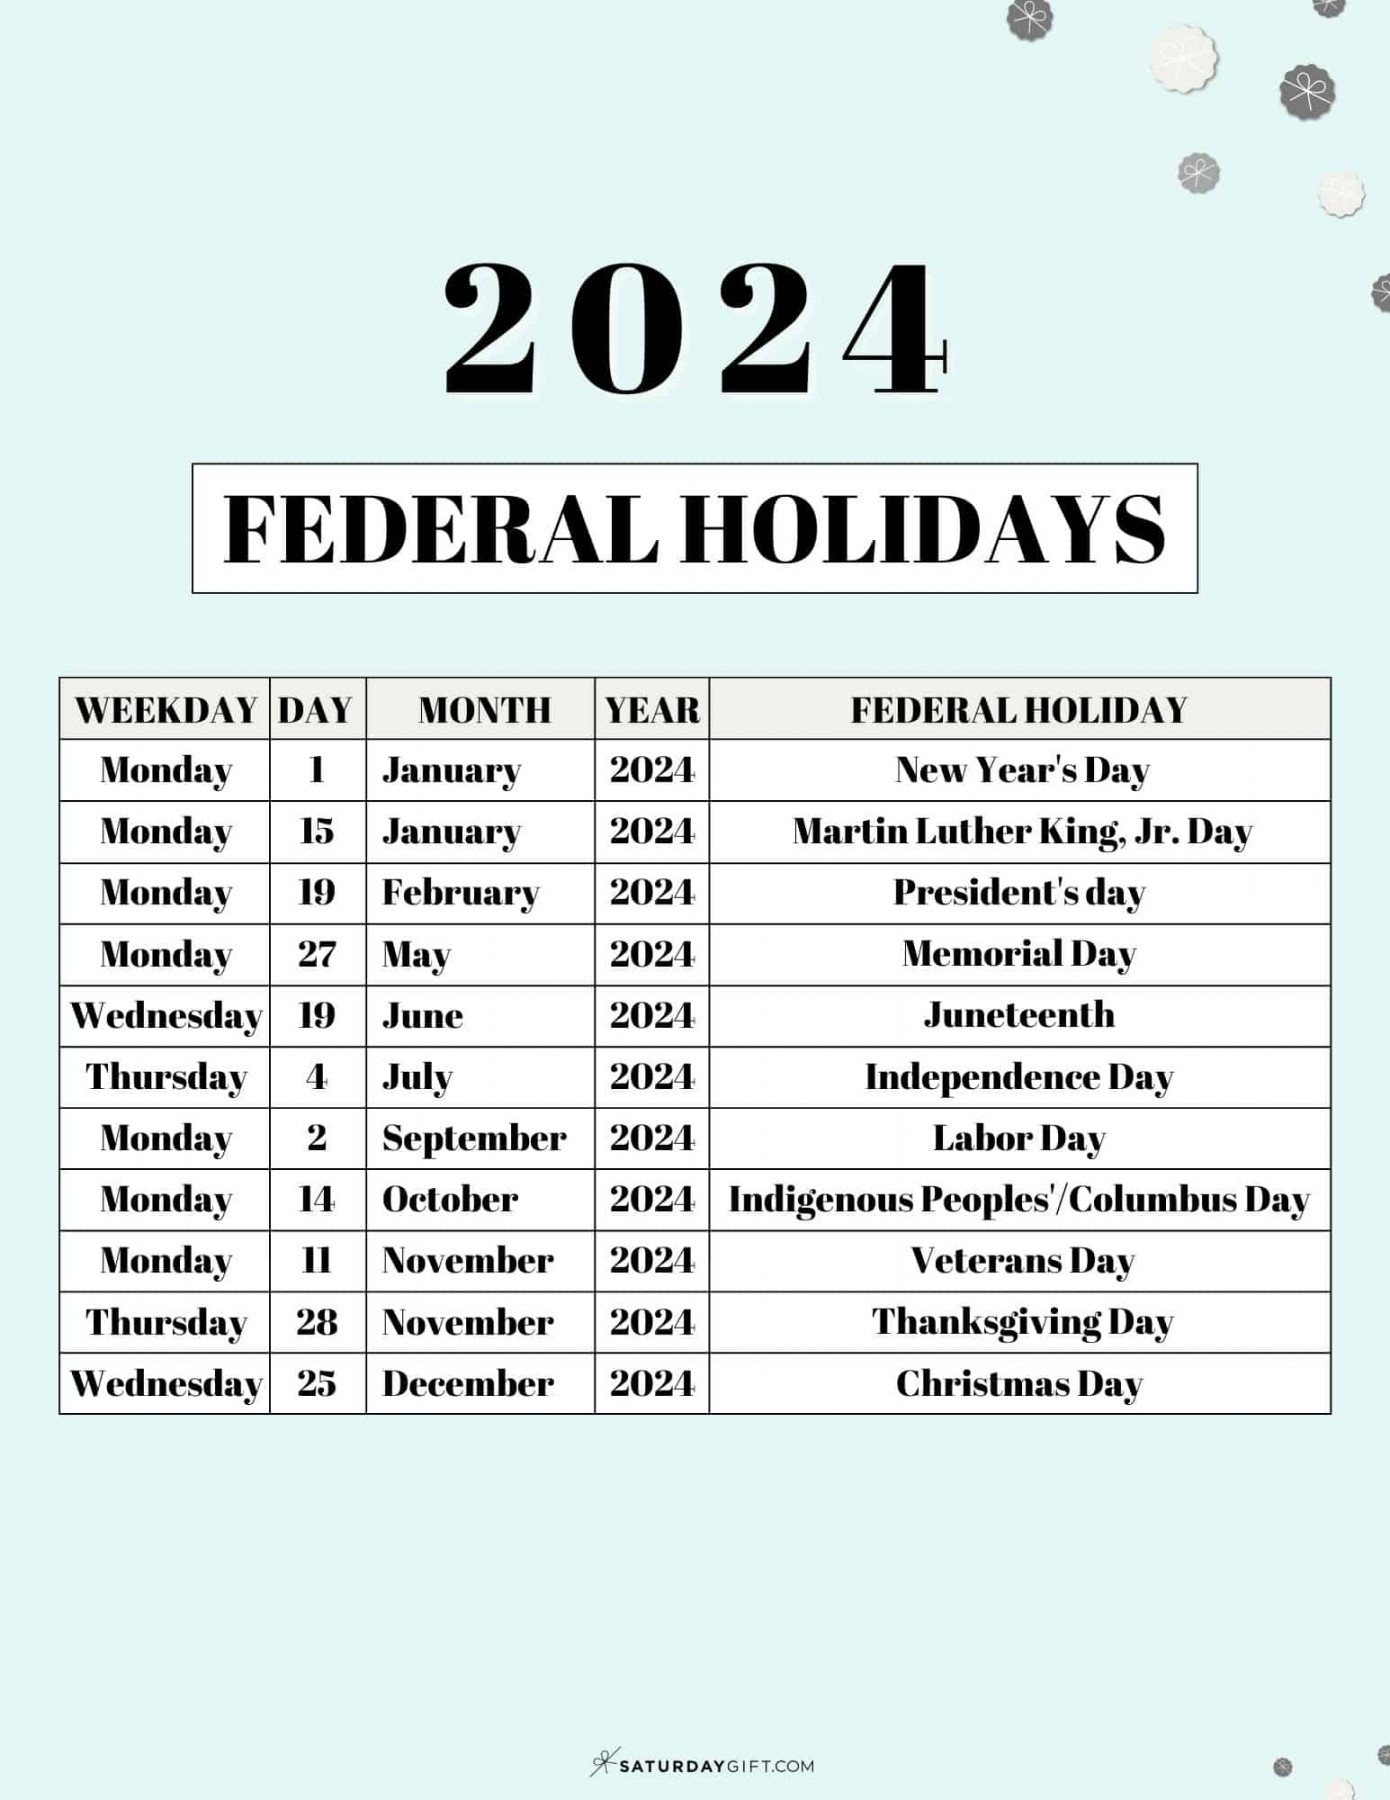 List of Federal holidays  in the U.S